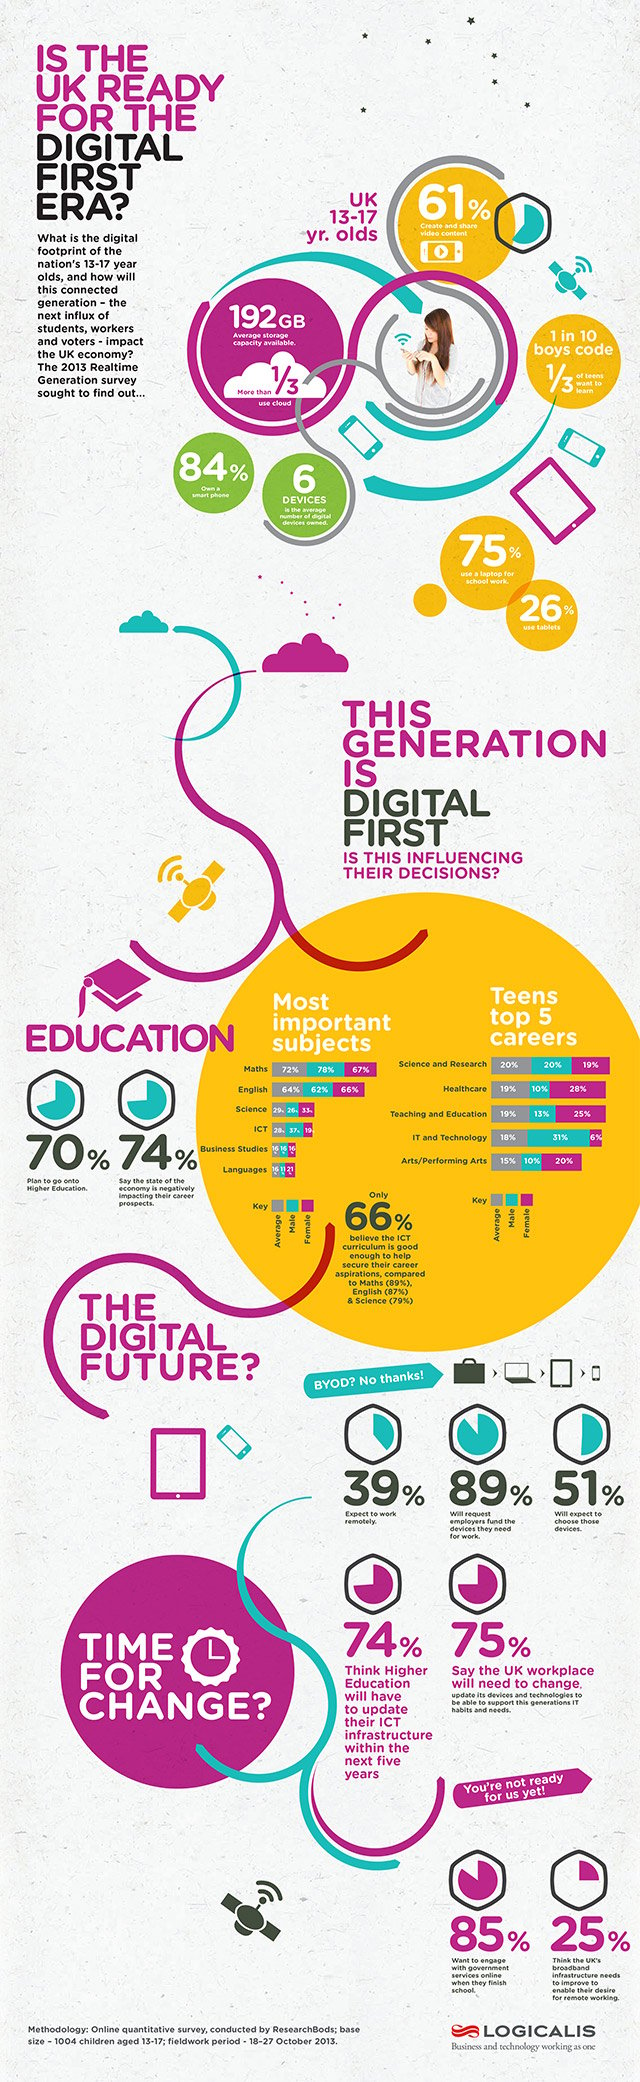 Real Time Generation 2013 infographic